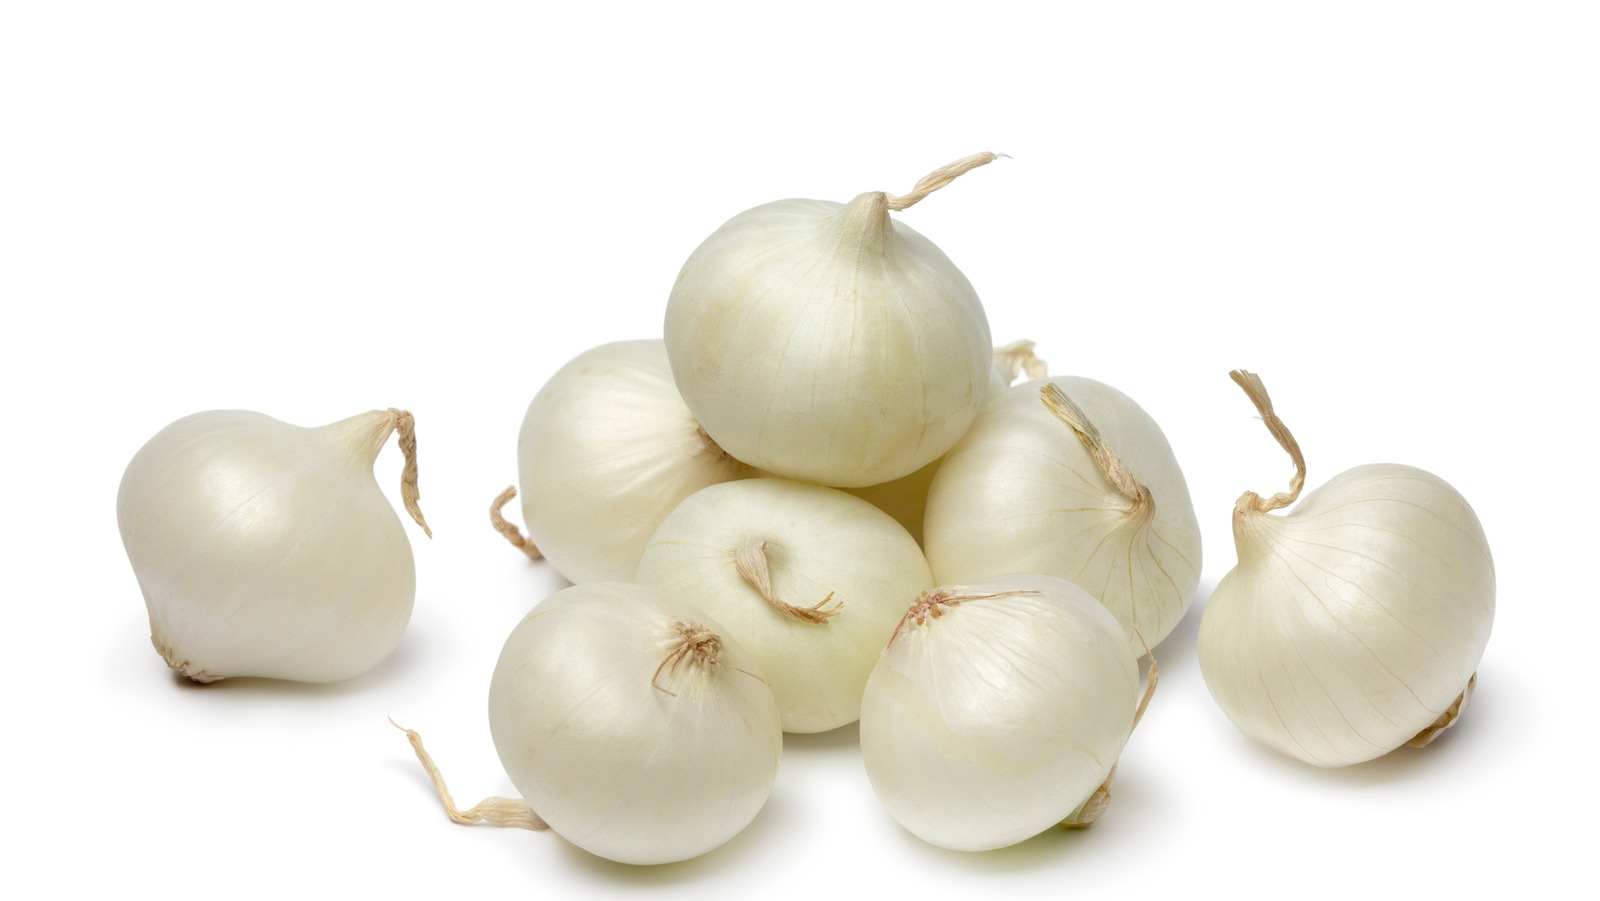 https://www.thedailymeal.com/img/gallery/chefs-agree-that-frozen-pearl-onions-are-just-as-good-as-fresh/l-intro-1675346461.jpg